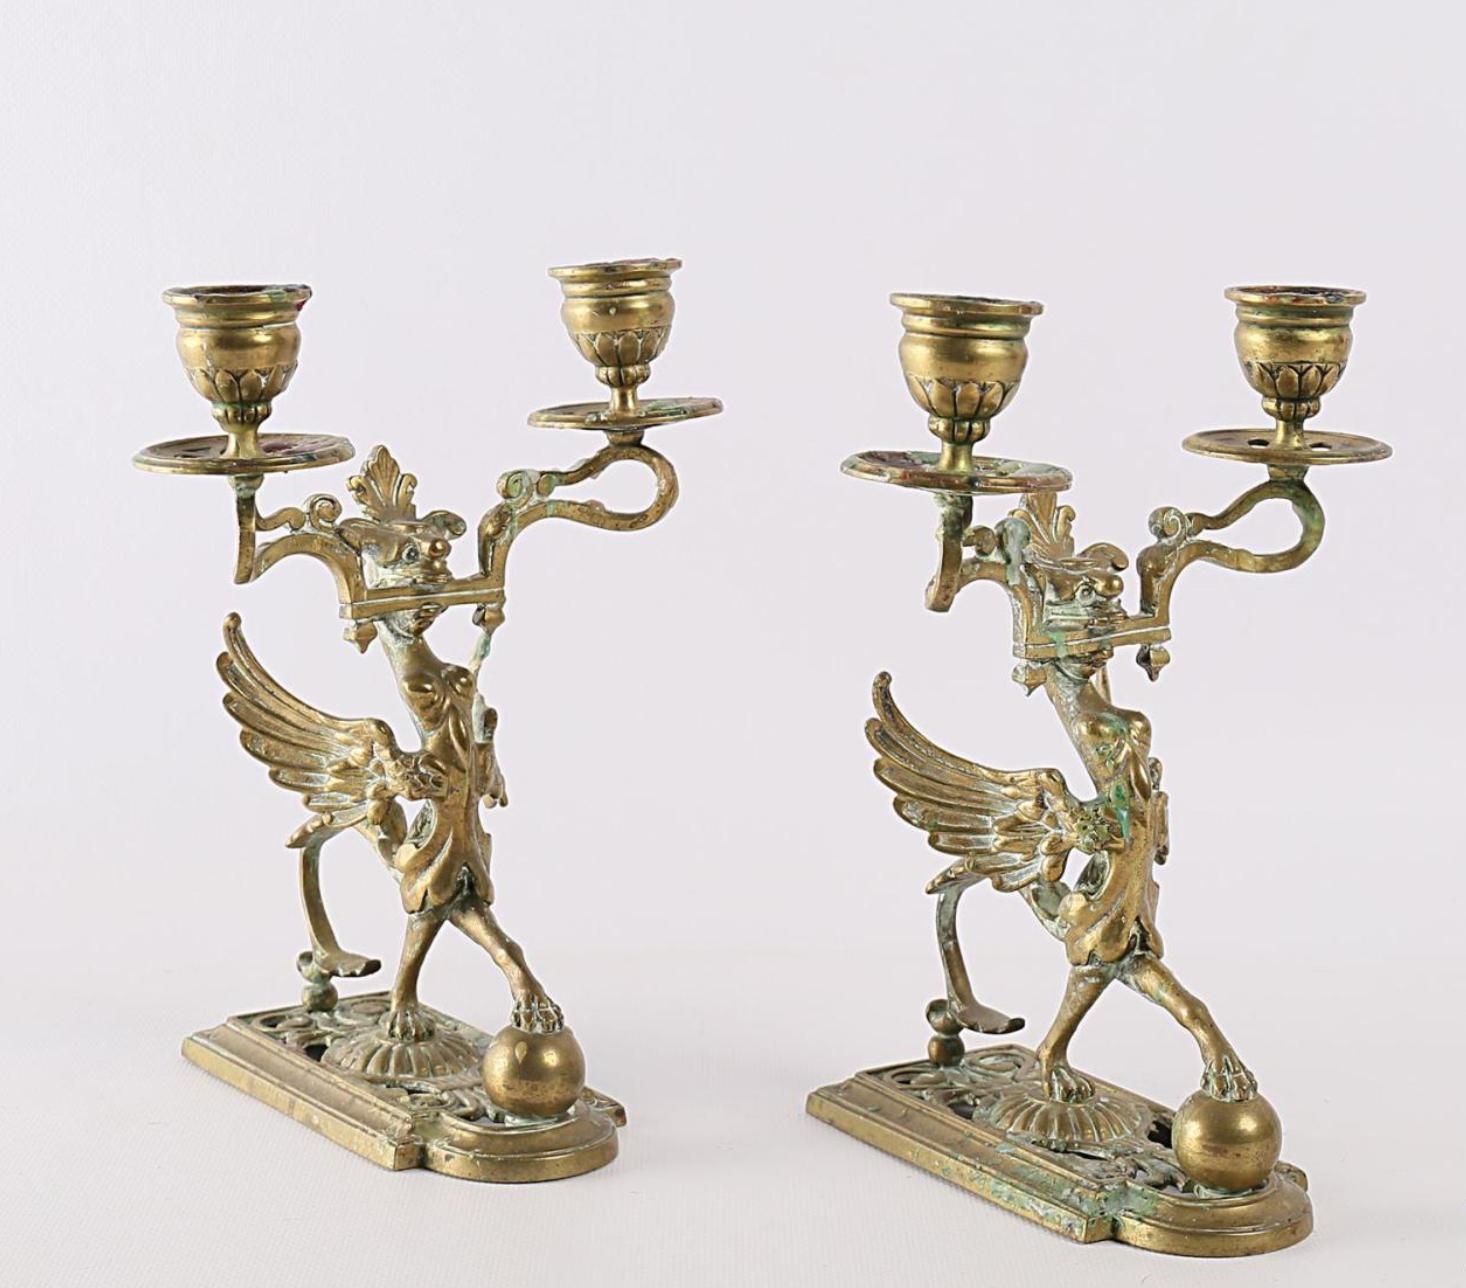 Fine pair of gilded metal candleholders with two arms of light, representing a chimeras with long wings poses on a balls.
France, circa 1870.